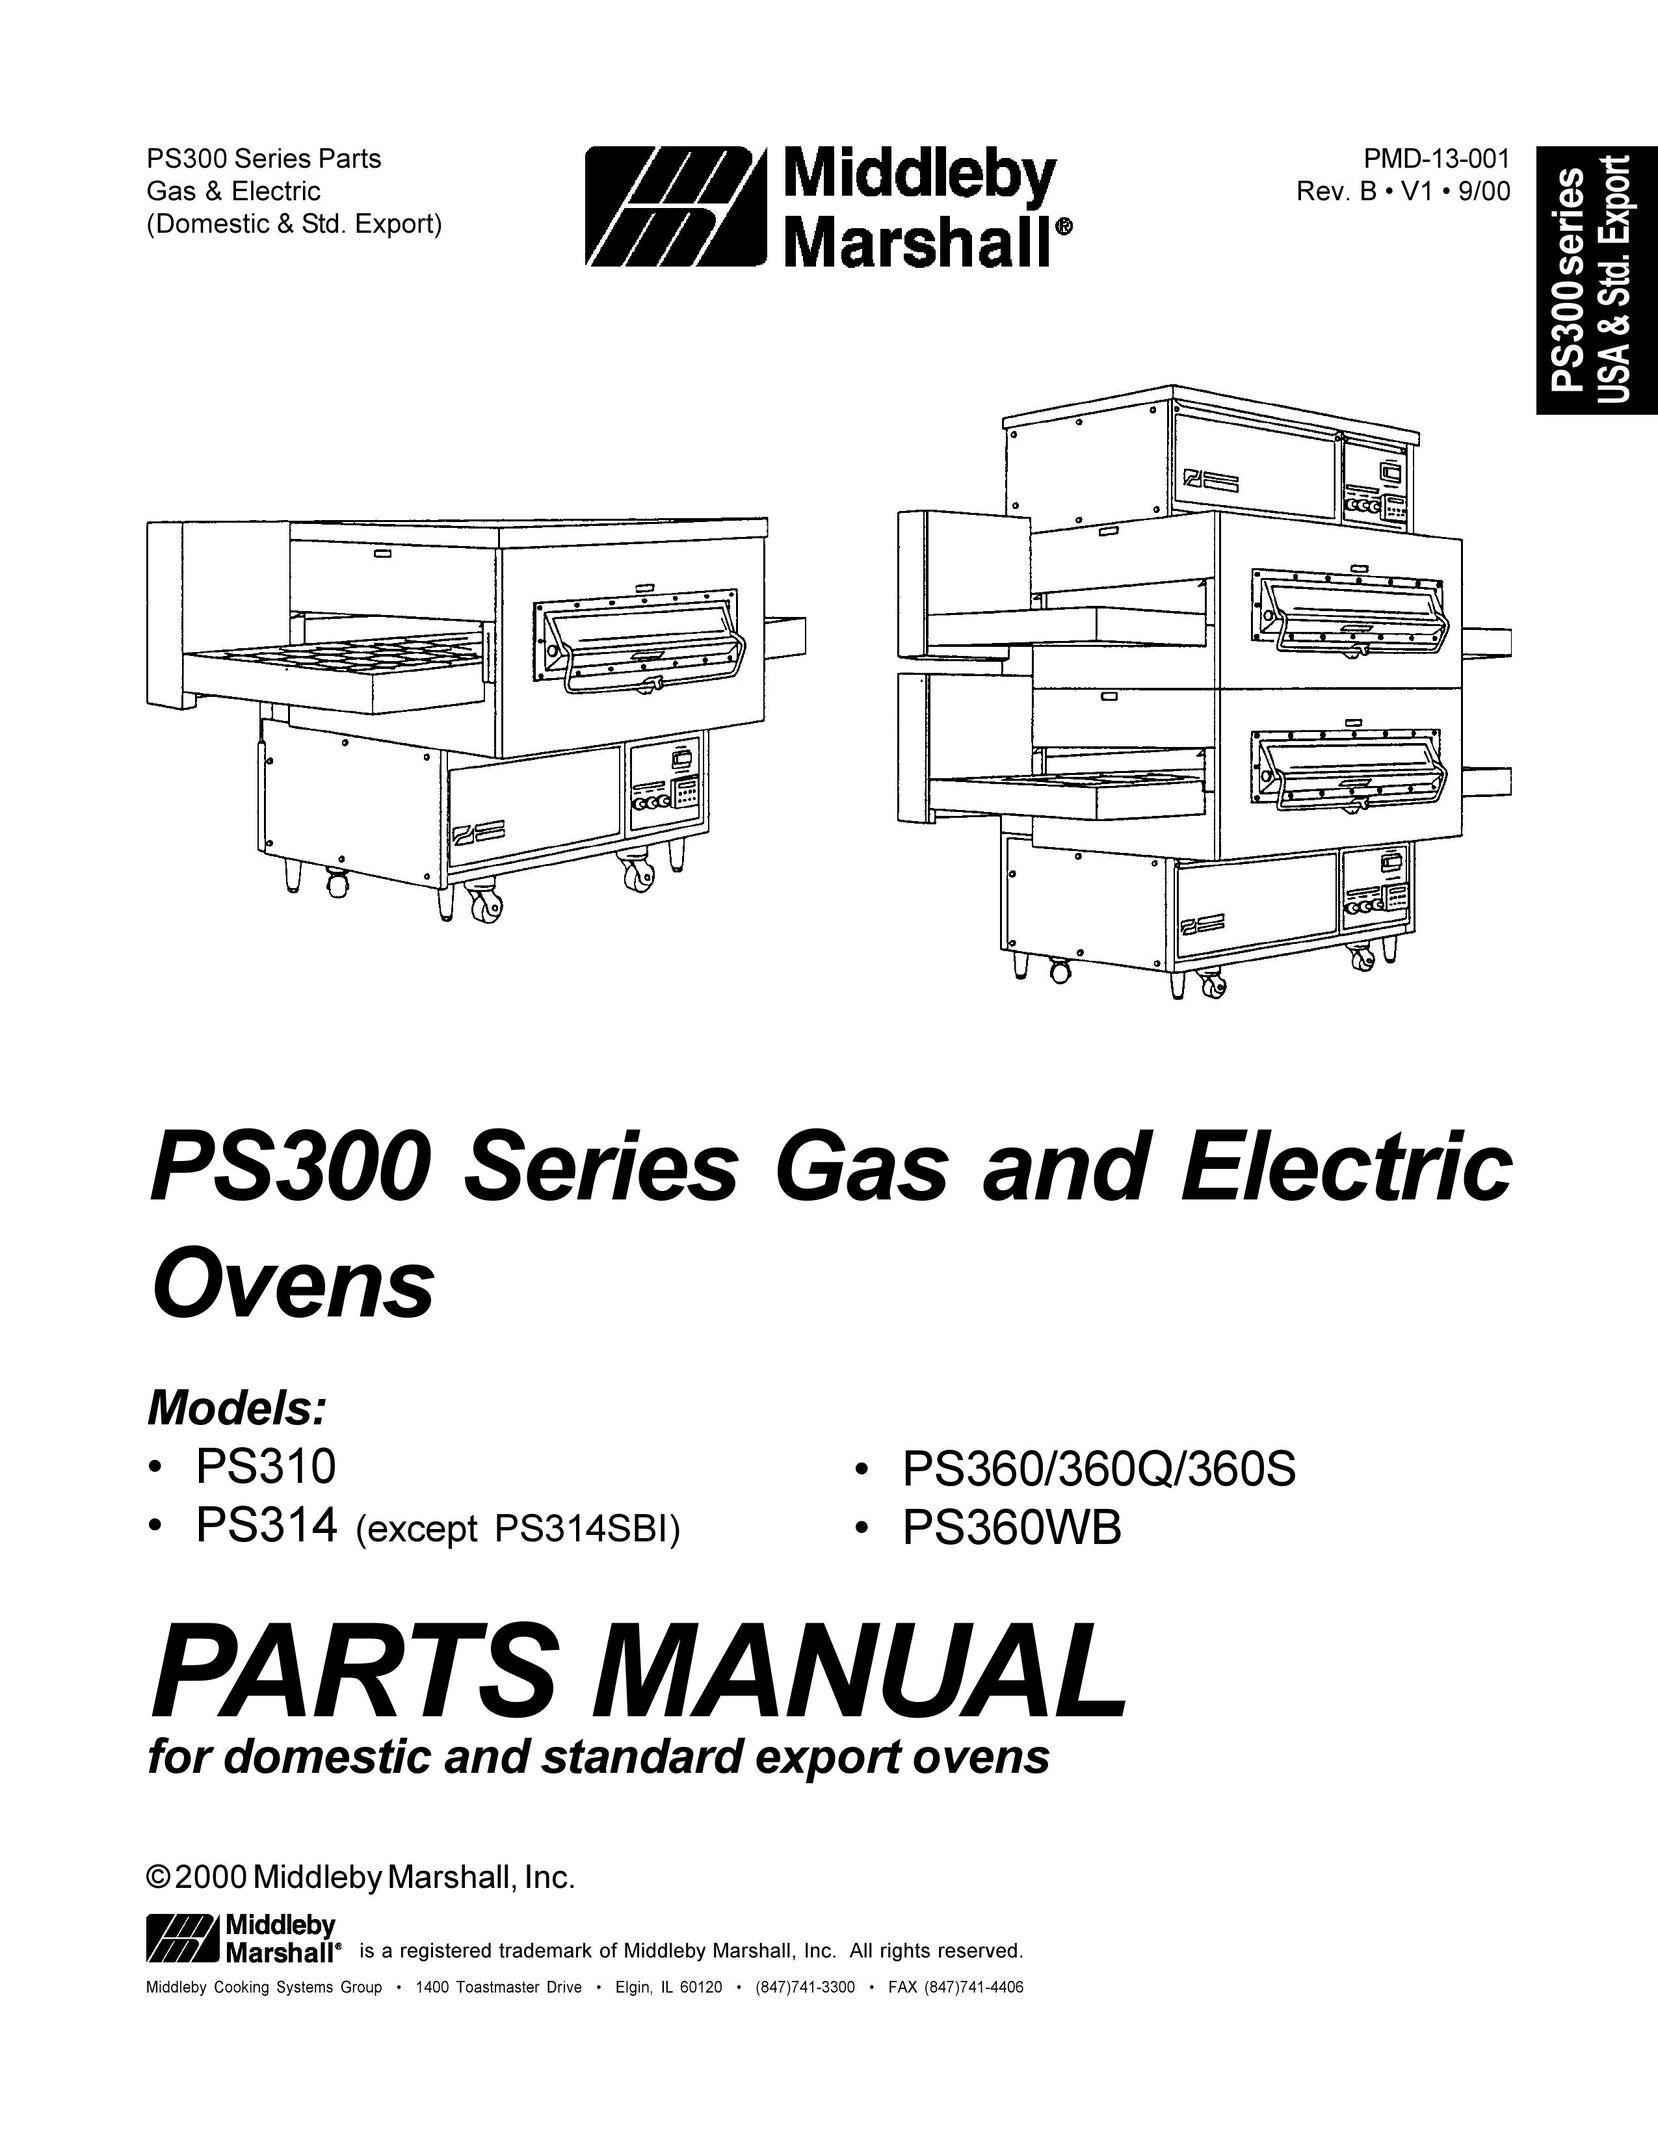 Middleby Marshall PS300 Series Oven User Manual